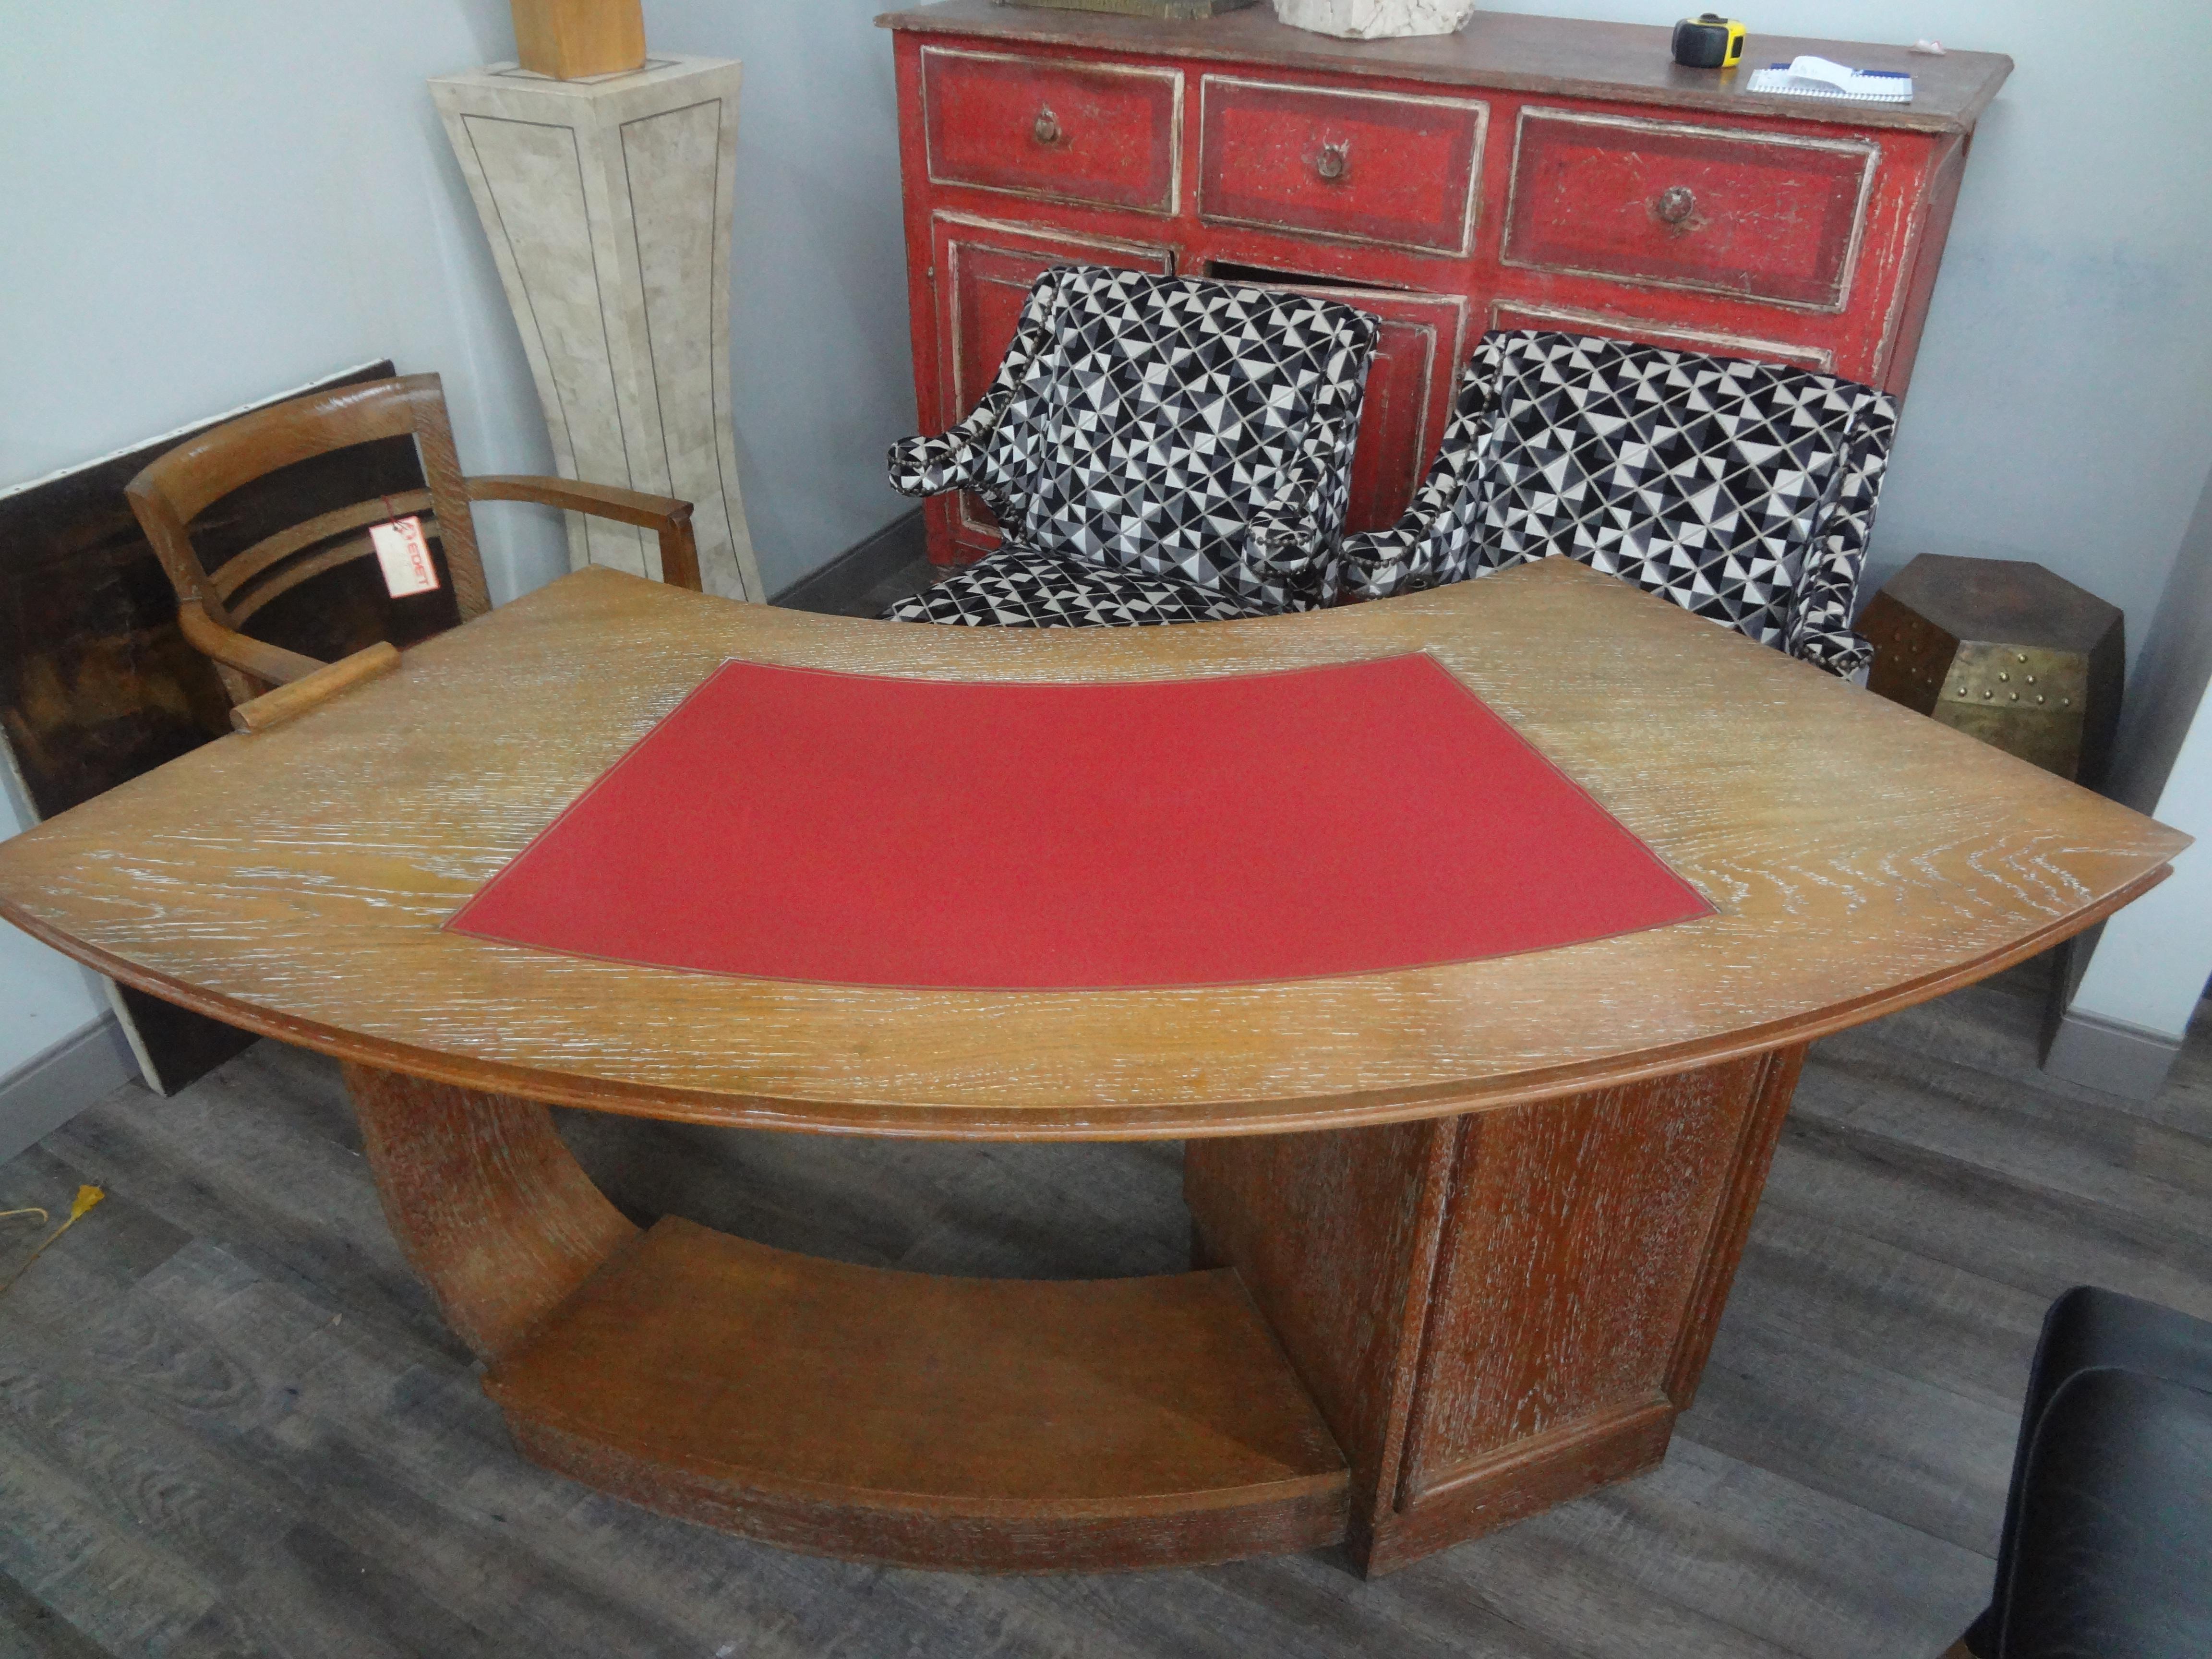 French Art Deco Cerused Oak Desk Attributed To Andre Sornay.
Handsome French Art Deco cerused or limed oak desk or writing table with four drawers and a red leather top attributed to Andre Sornay. This stunning curved desk has beautiful lines on